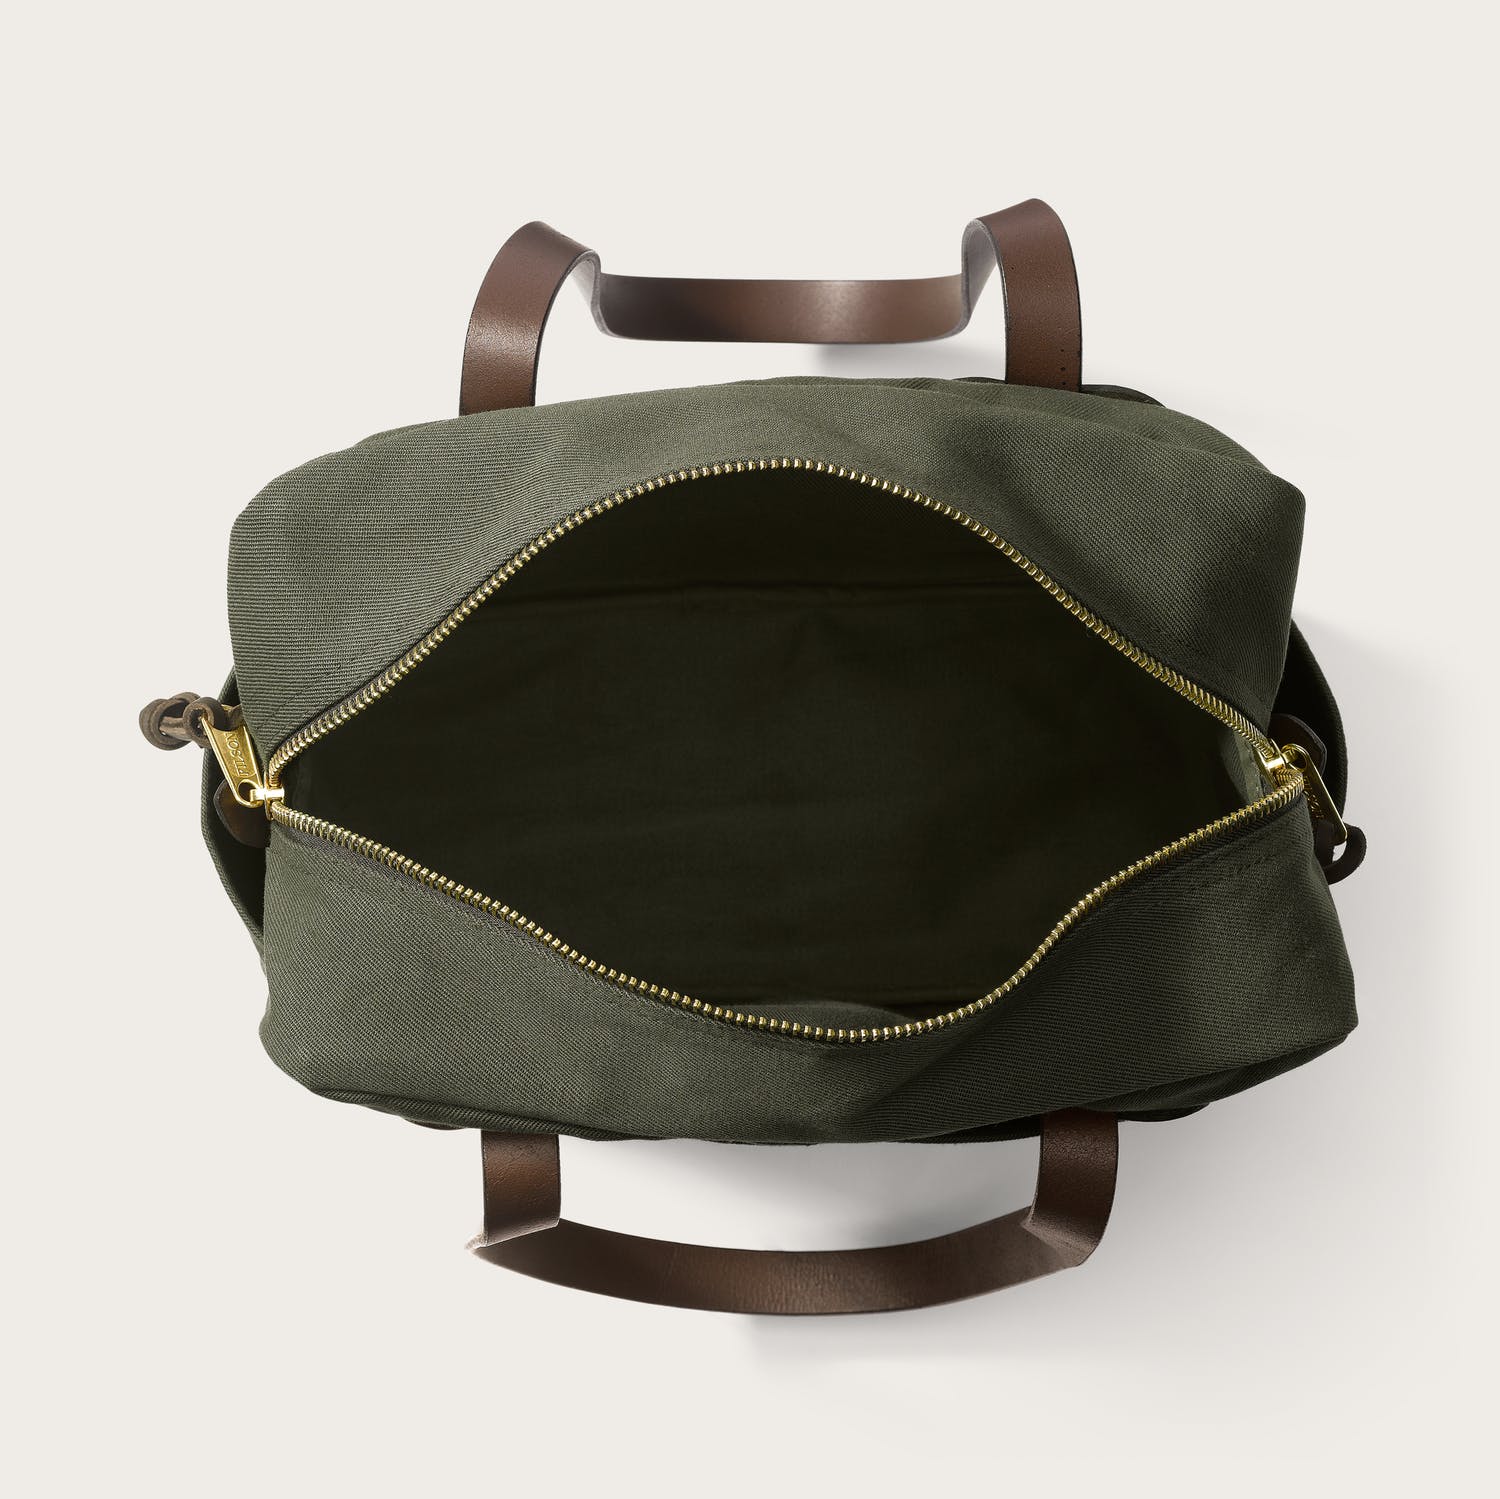 FILSON - RUGGED TWILL TOTE BAG WITH ZIPPER - OTTER GREEN